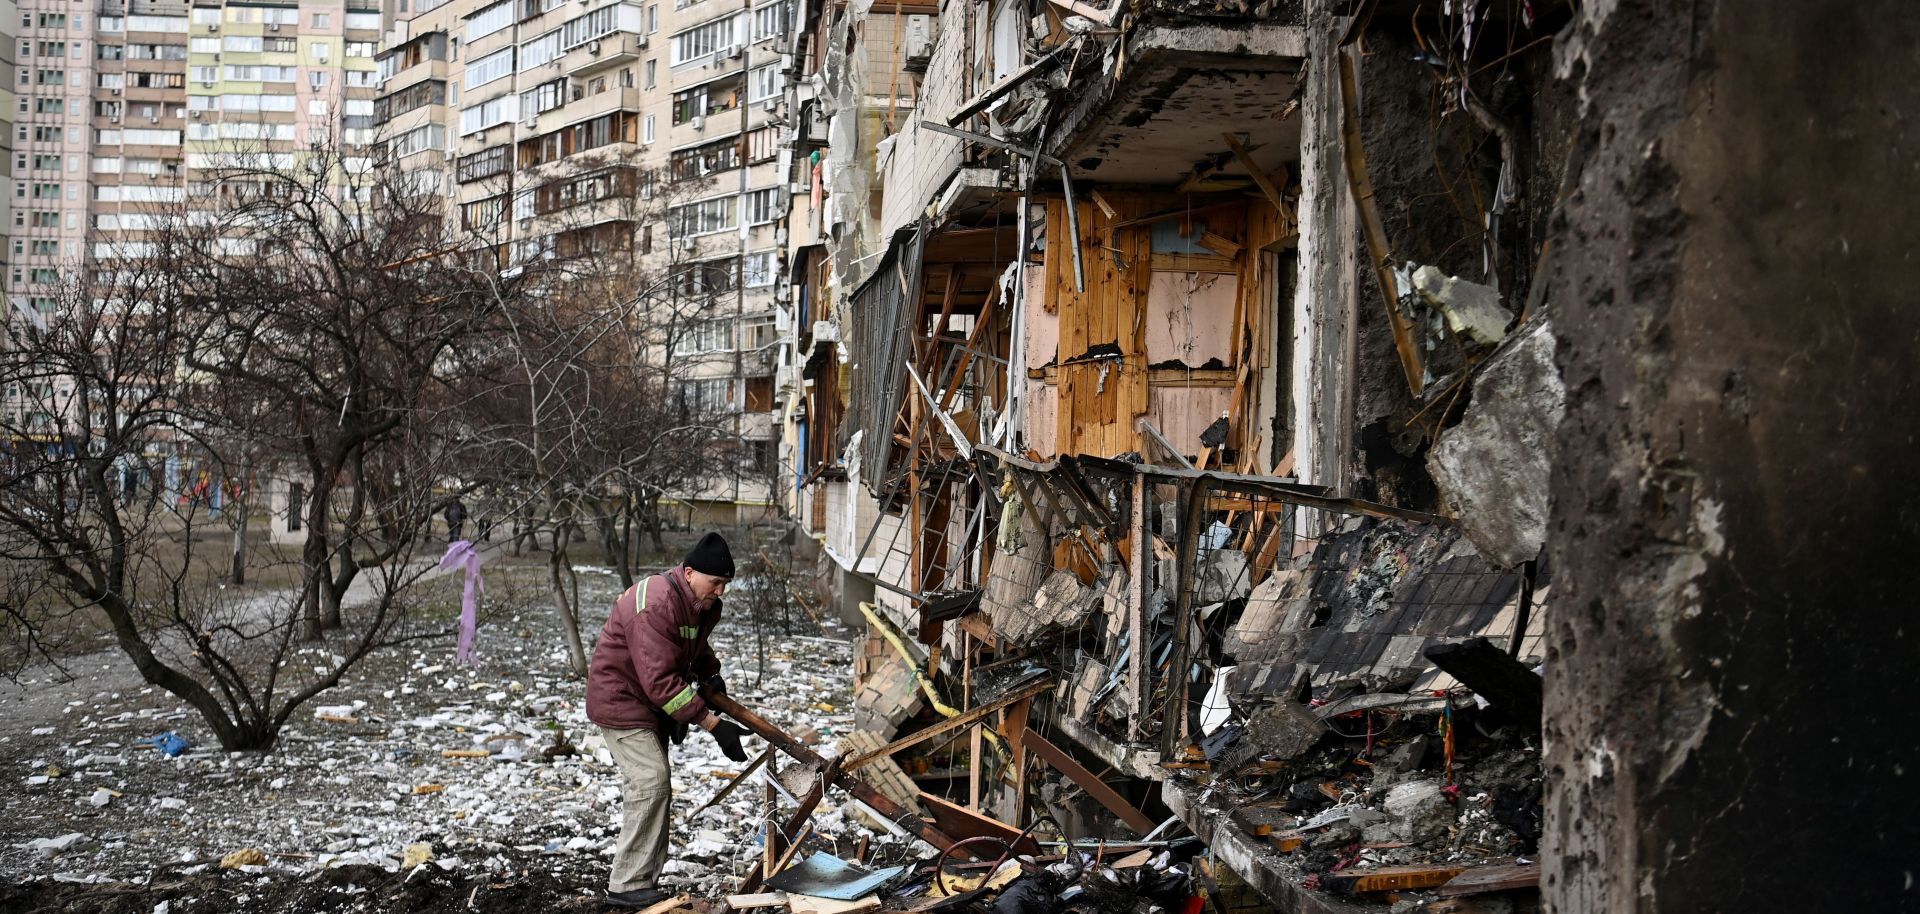 A man clears debris around a residential building allegedly hit by a military shell in a suburb outside of Kyiv, Ukraine, on Feb. 25, 2022.